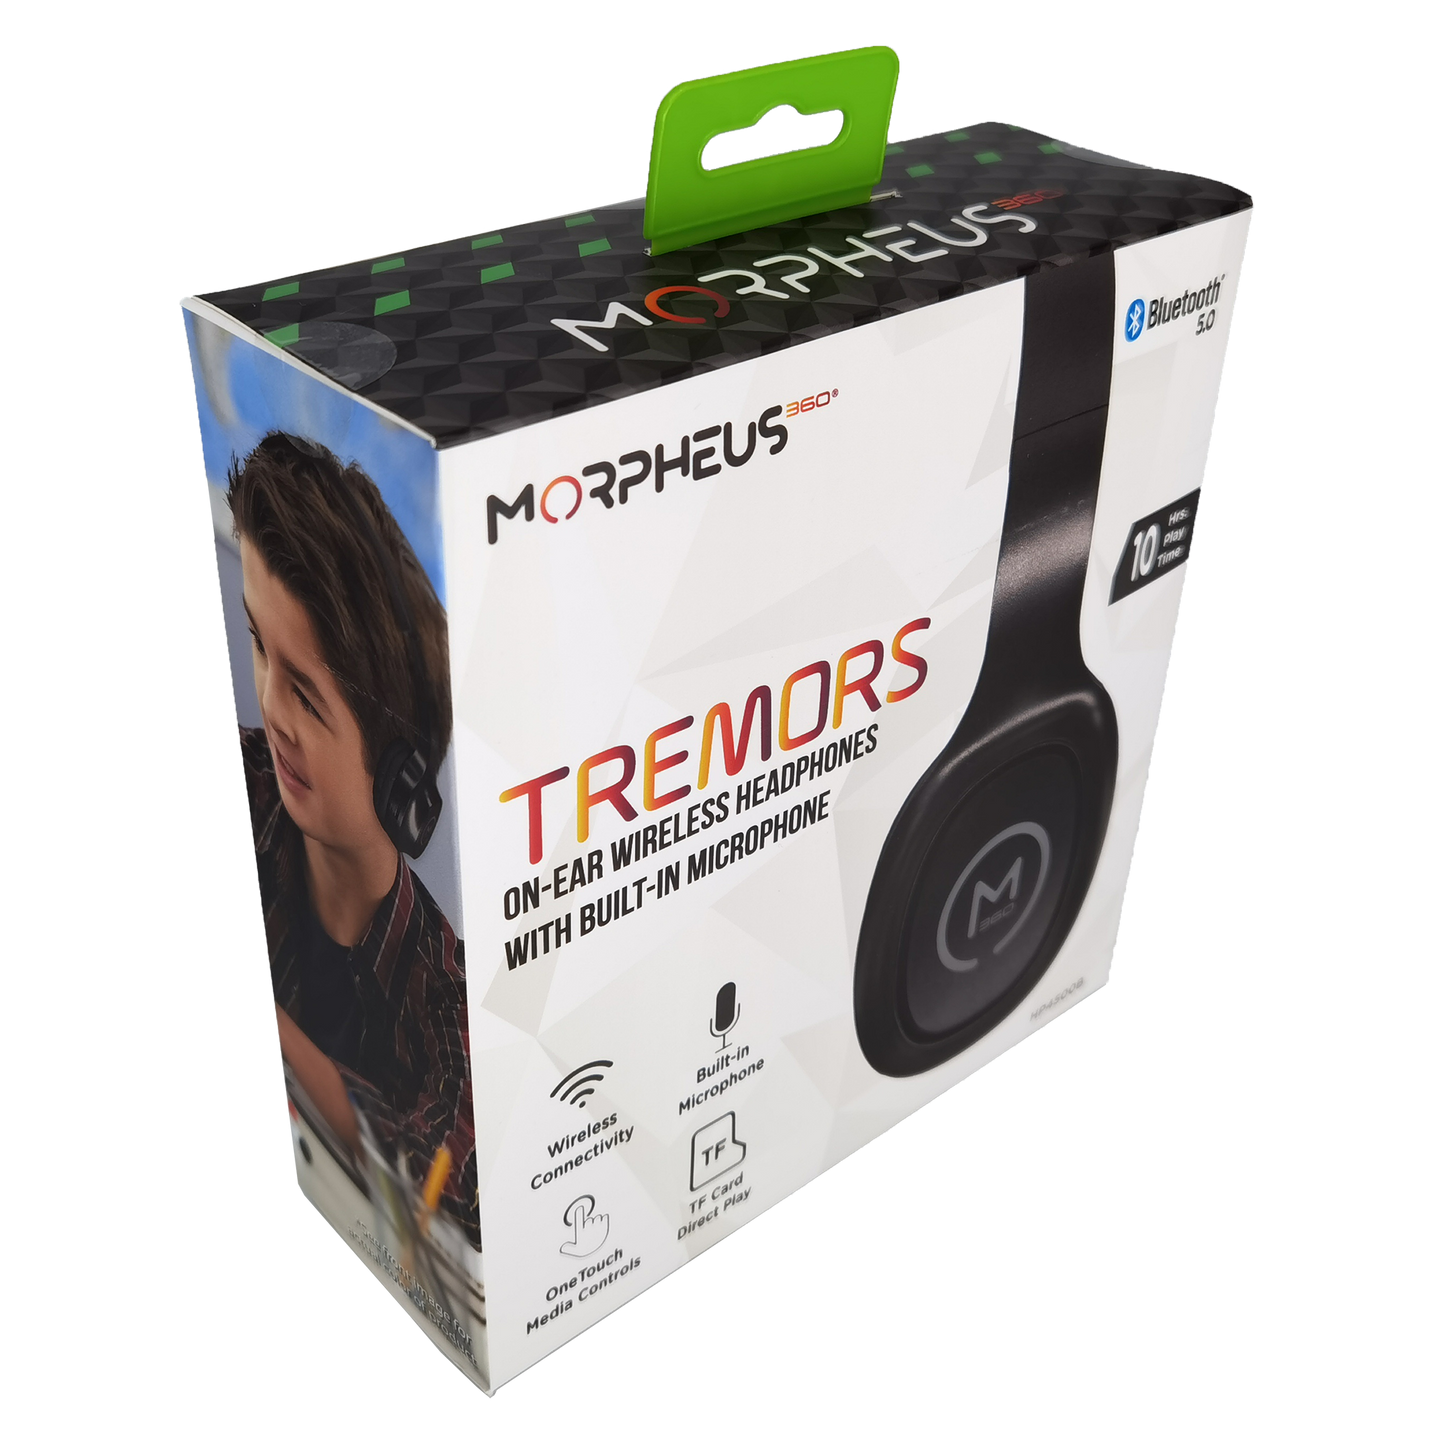 Photo of Morpheus 360 Tremors Wireless on-ear Headphones Retail Packaging, displays a side view of the black Tremors headphones, Bluetooth 5.0, 10 Hours of Playtime, Wireless Connectivity, Built-in Microphone, One Touch Media Controls, and TF Card Direct Play features.